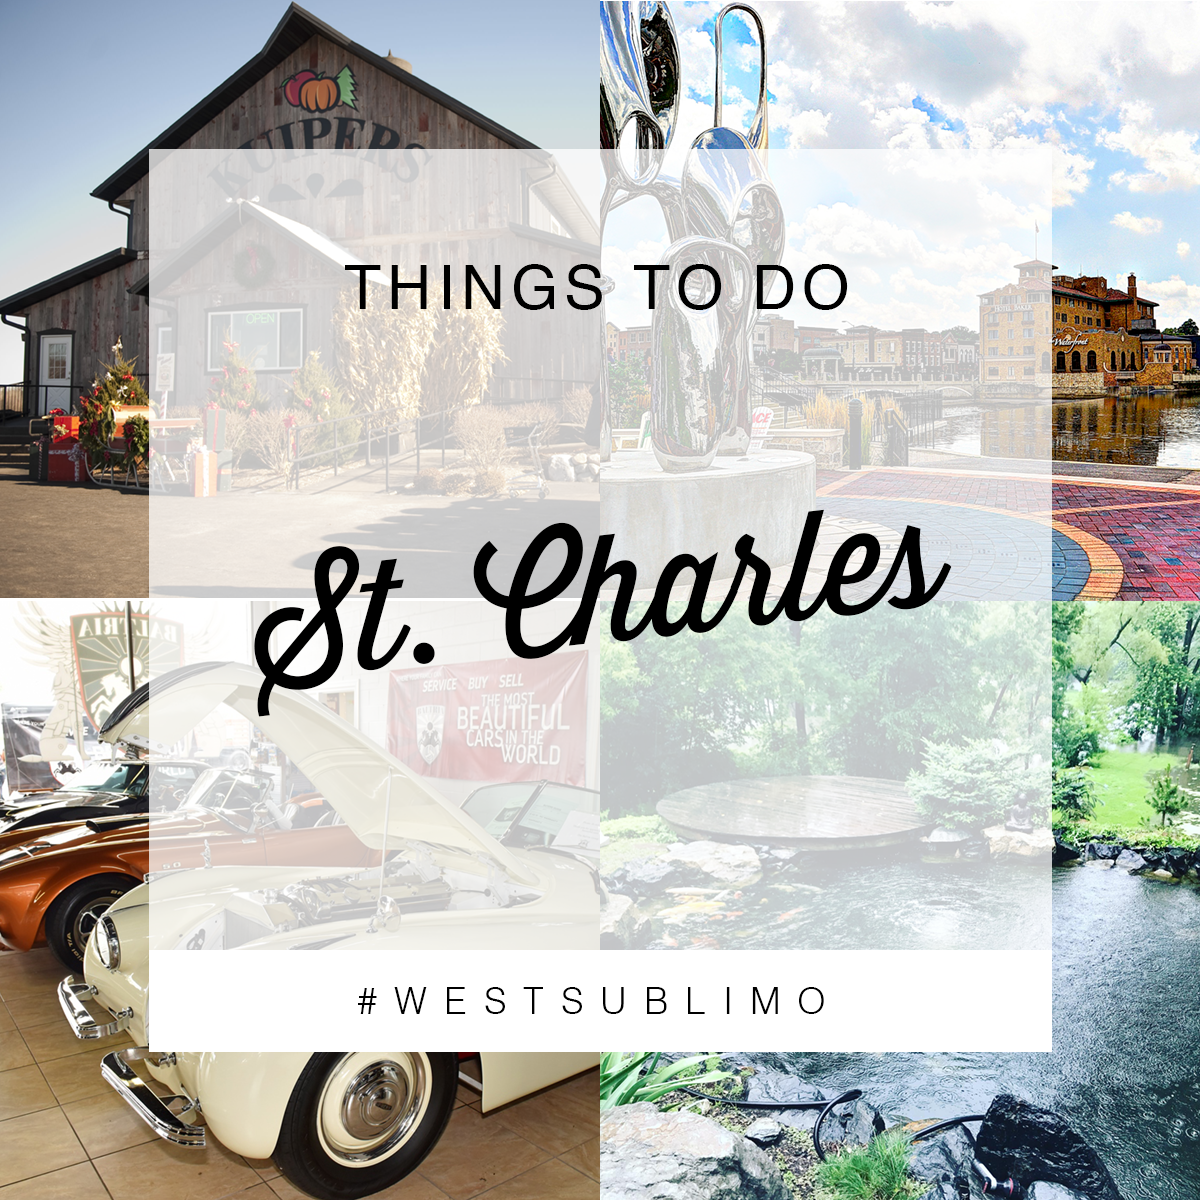 things to do in saint charles illinois